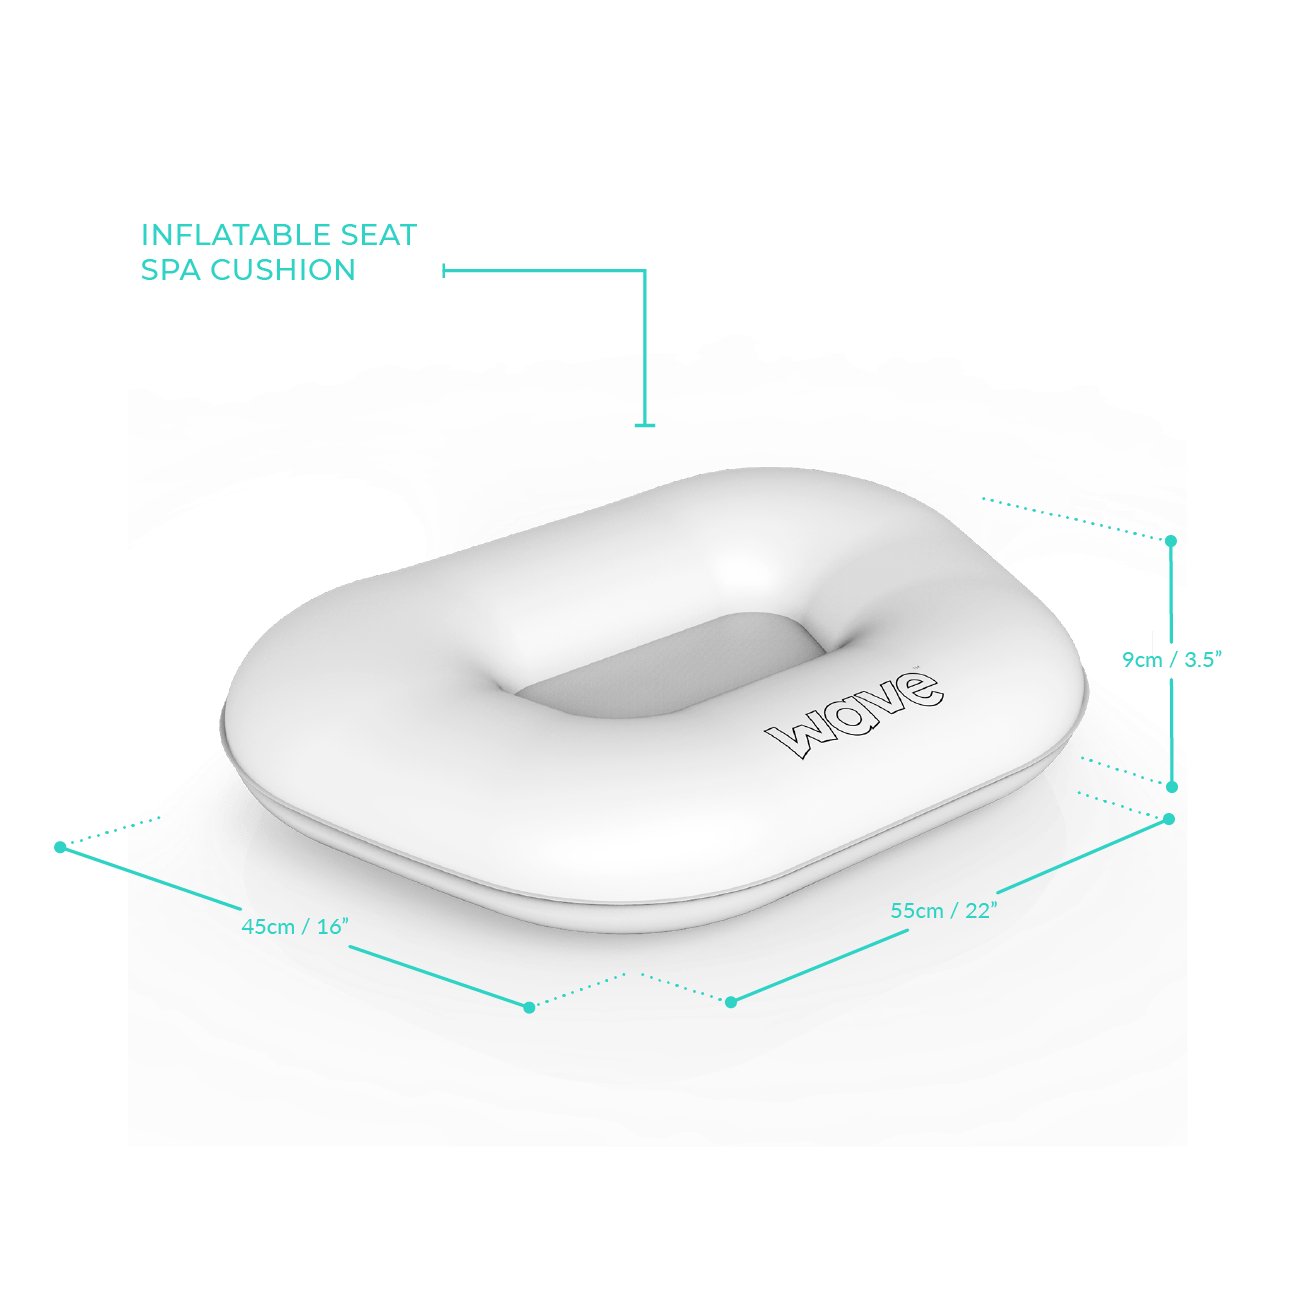 Hot Tub Inflatable Seat Cushion/Floating Tray | White - Wave Spas Inflatable, foam Hot Tubs